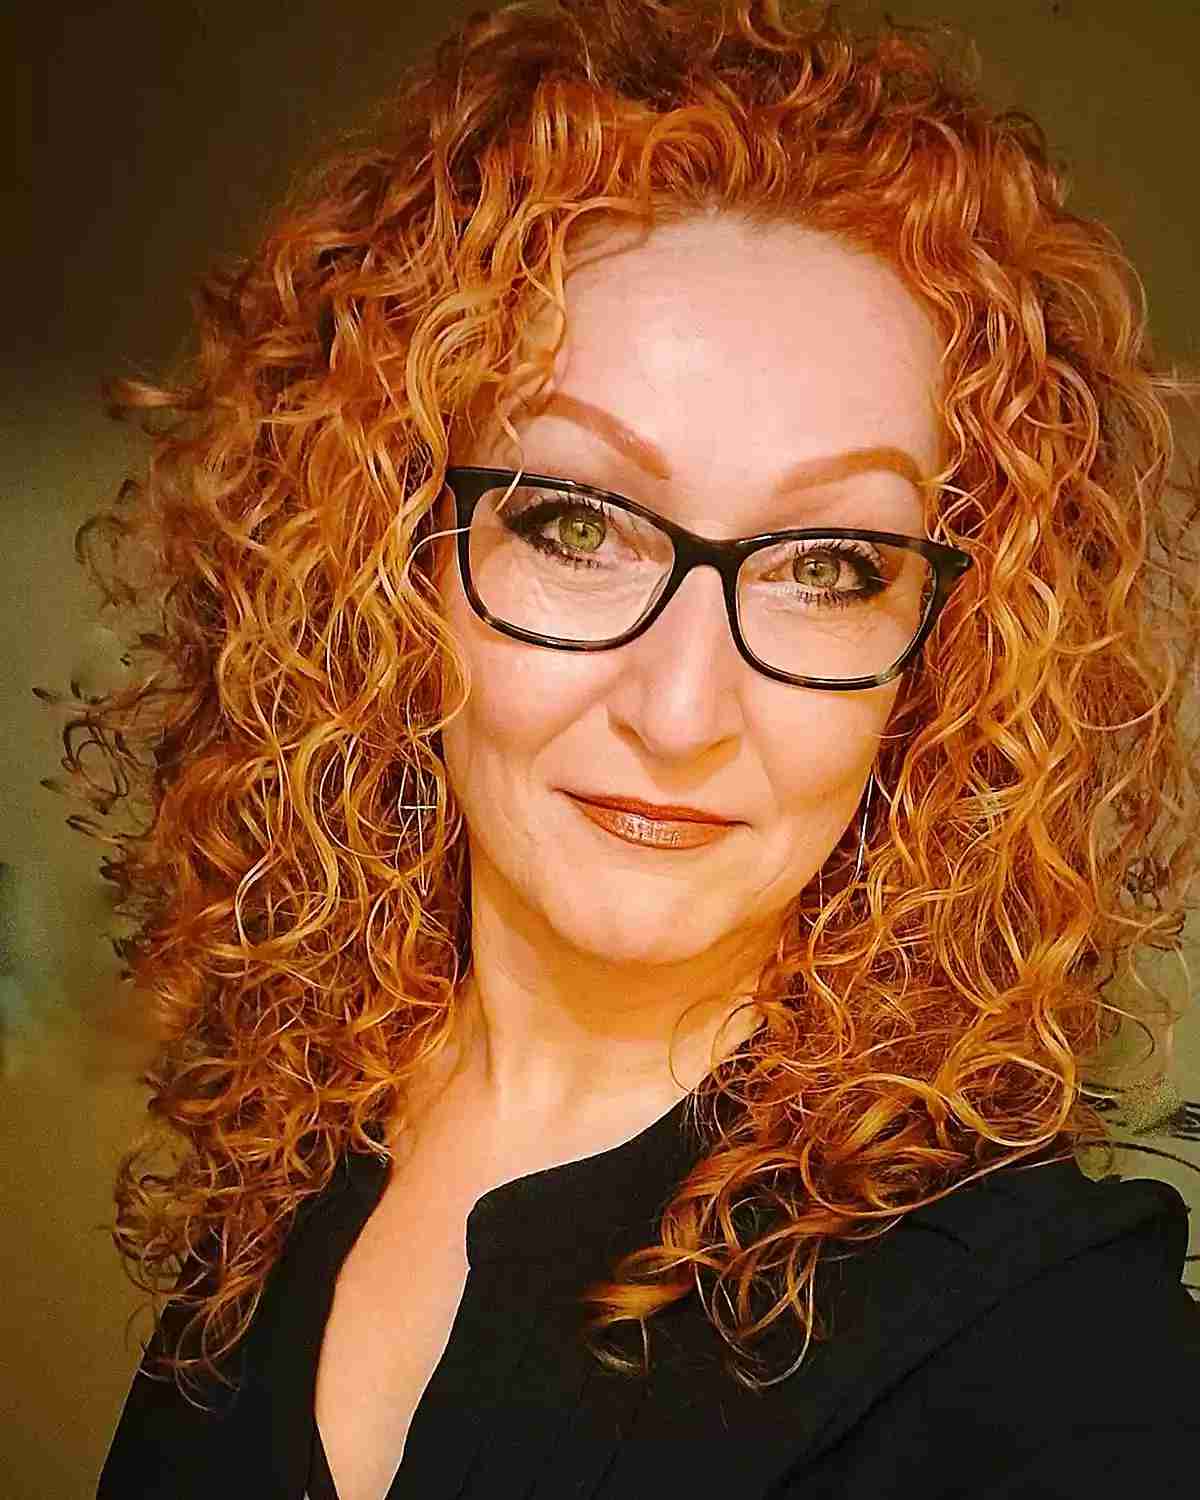 Medium-Length Layered Cut with Defined Curls on Women Aged 50 with Specs